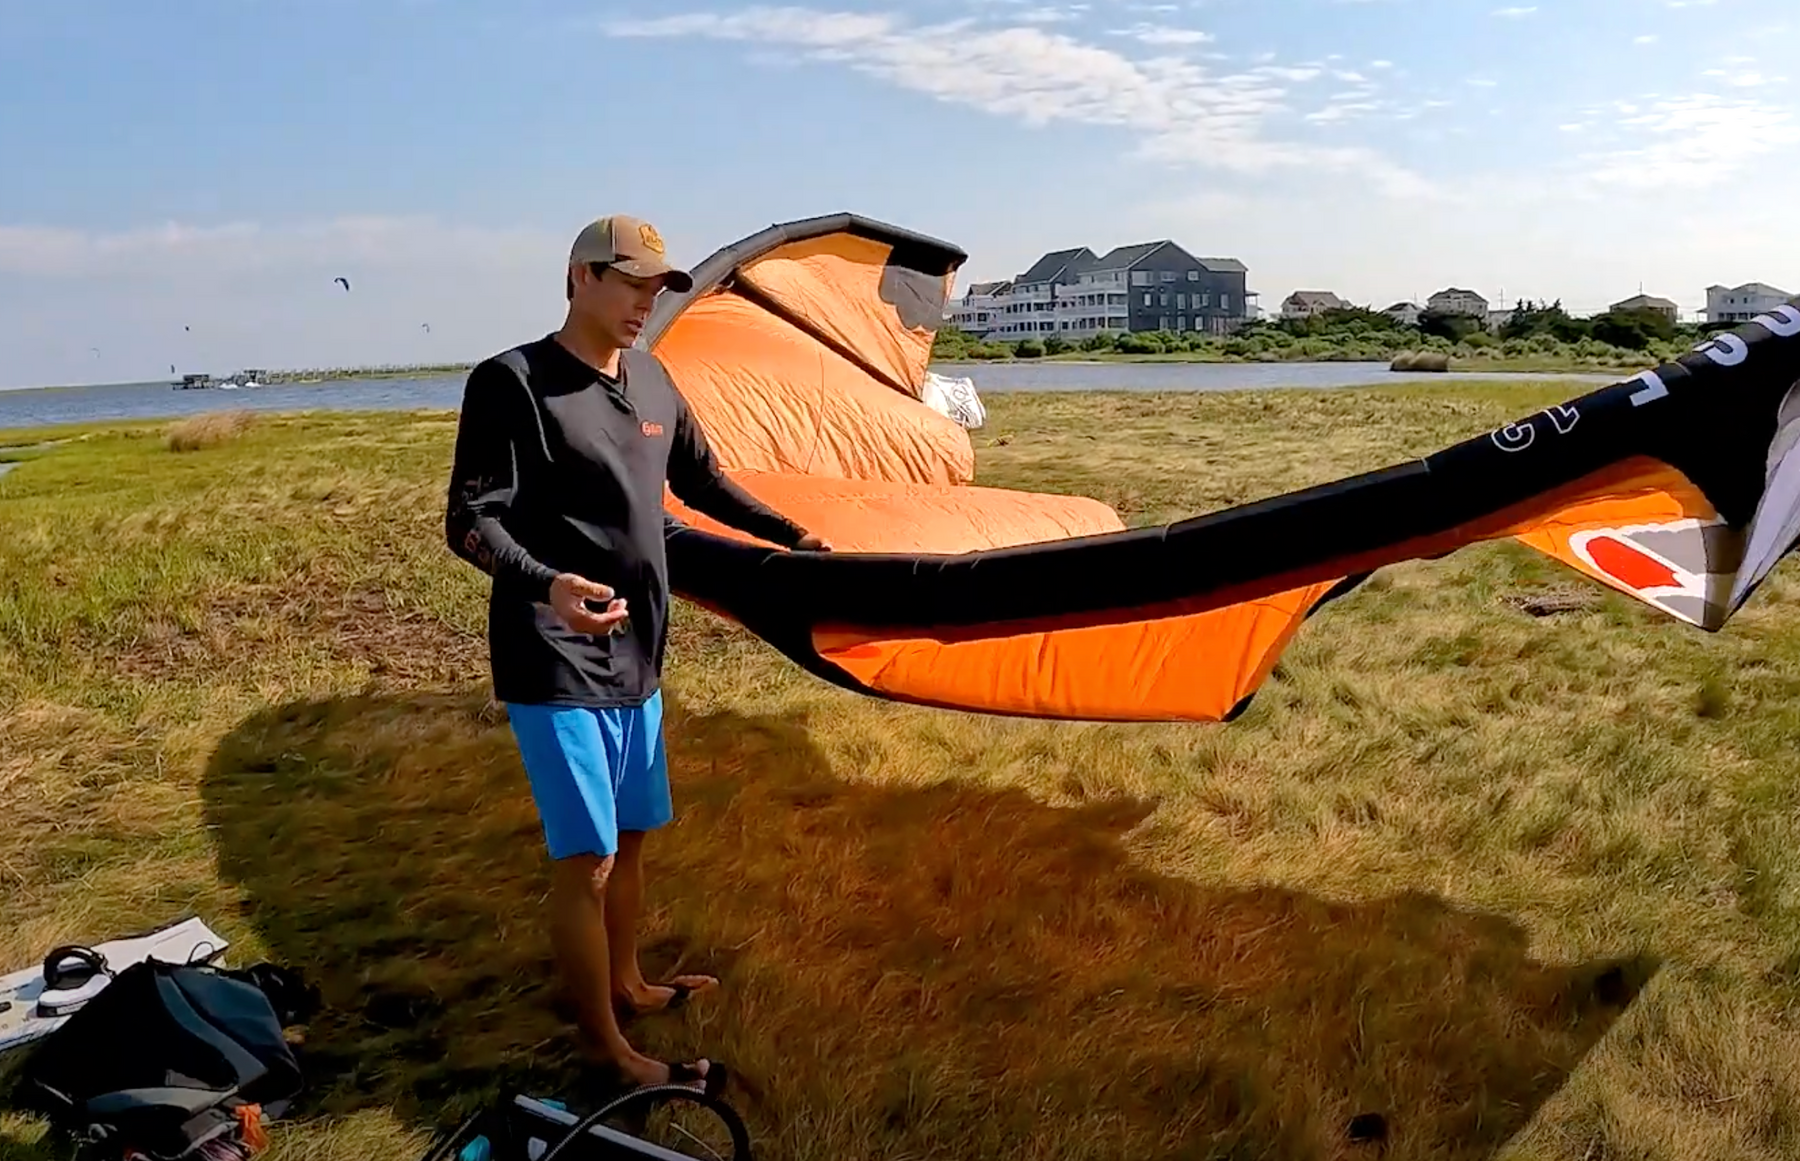 How to set up your kiteboarding gear